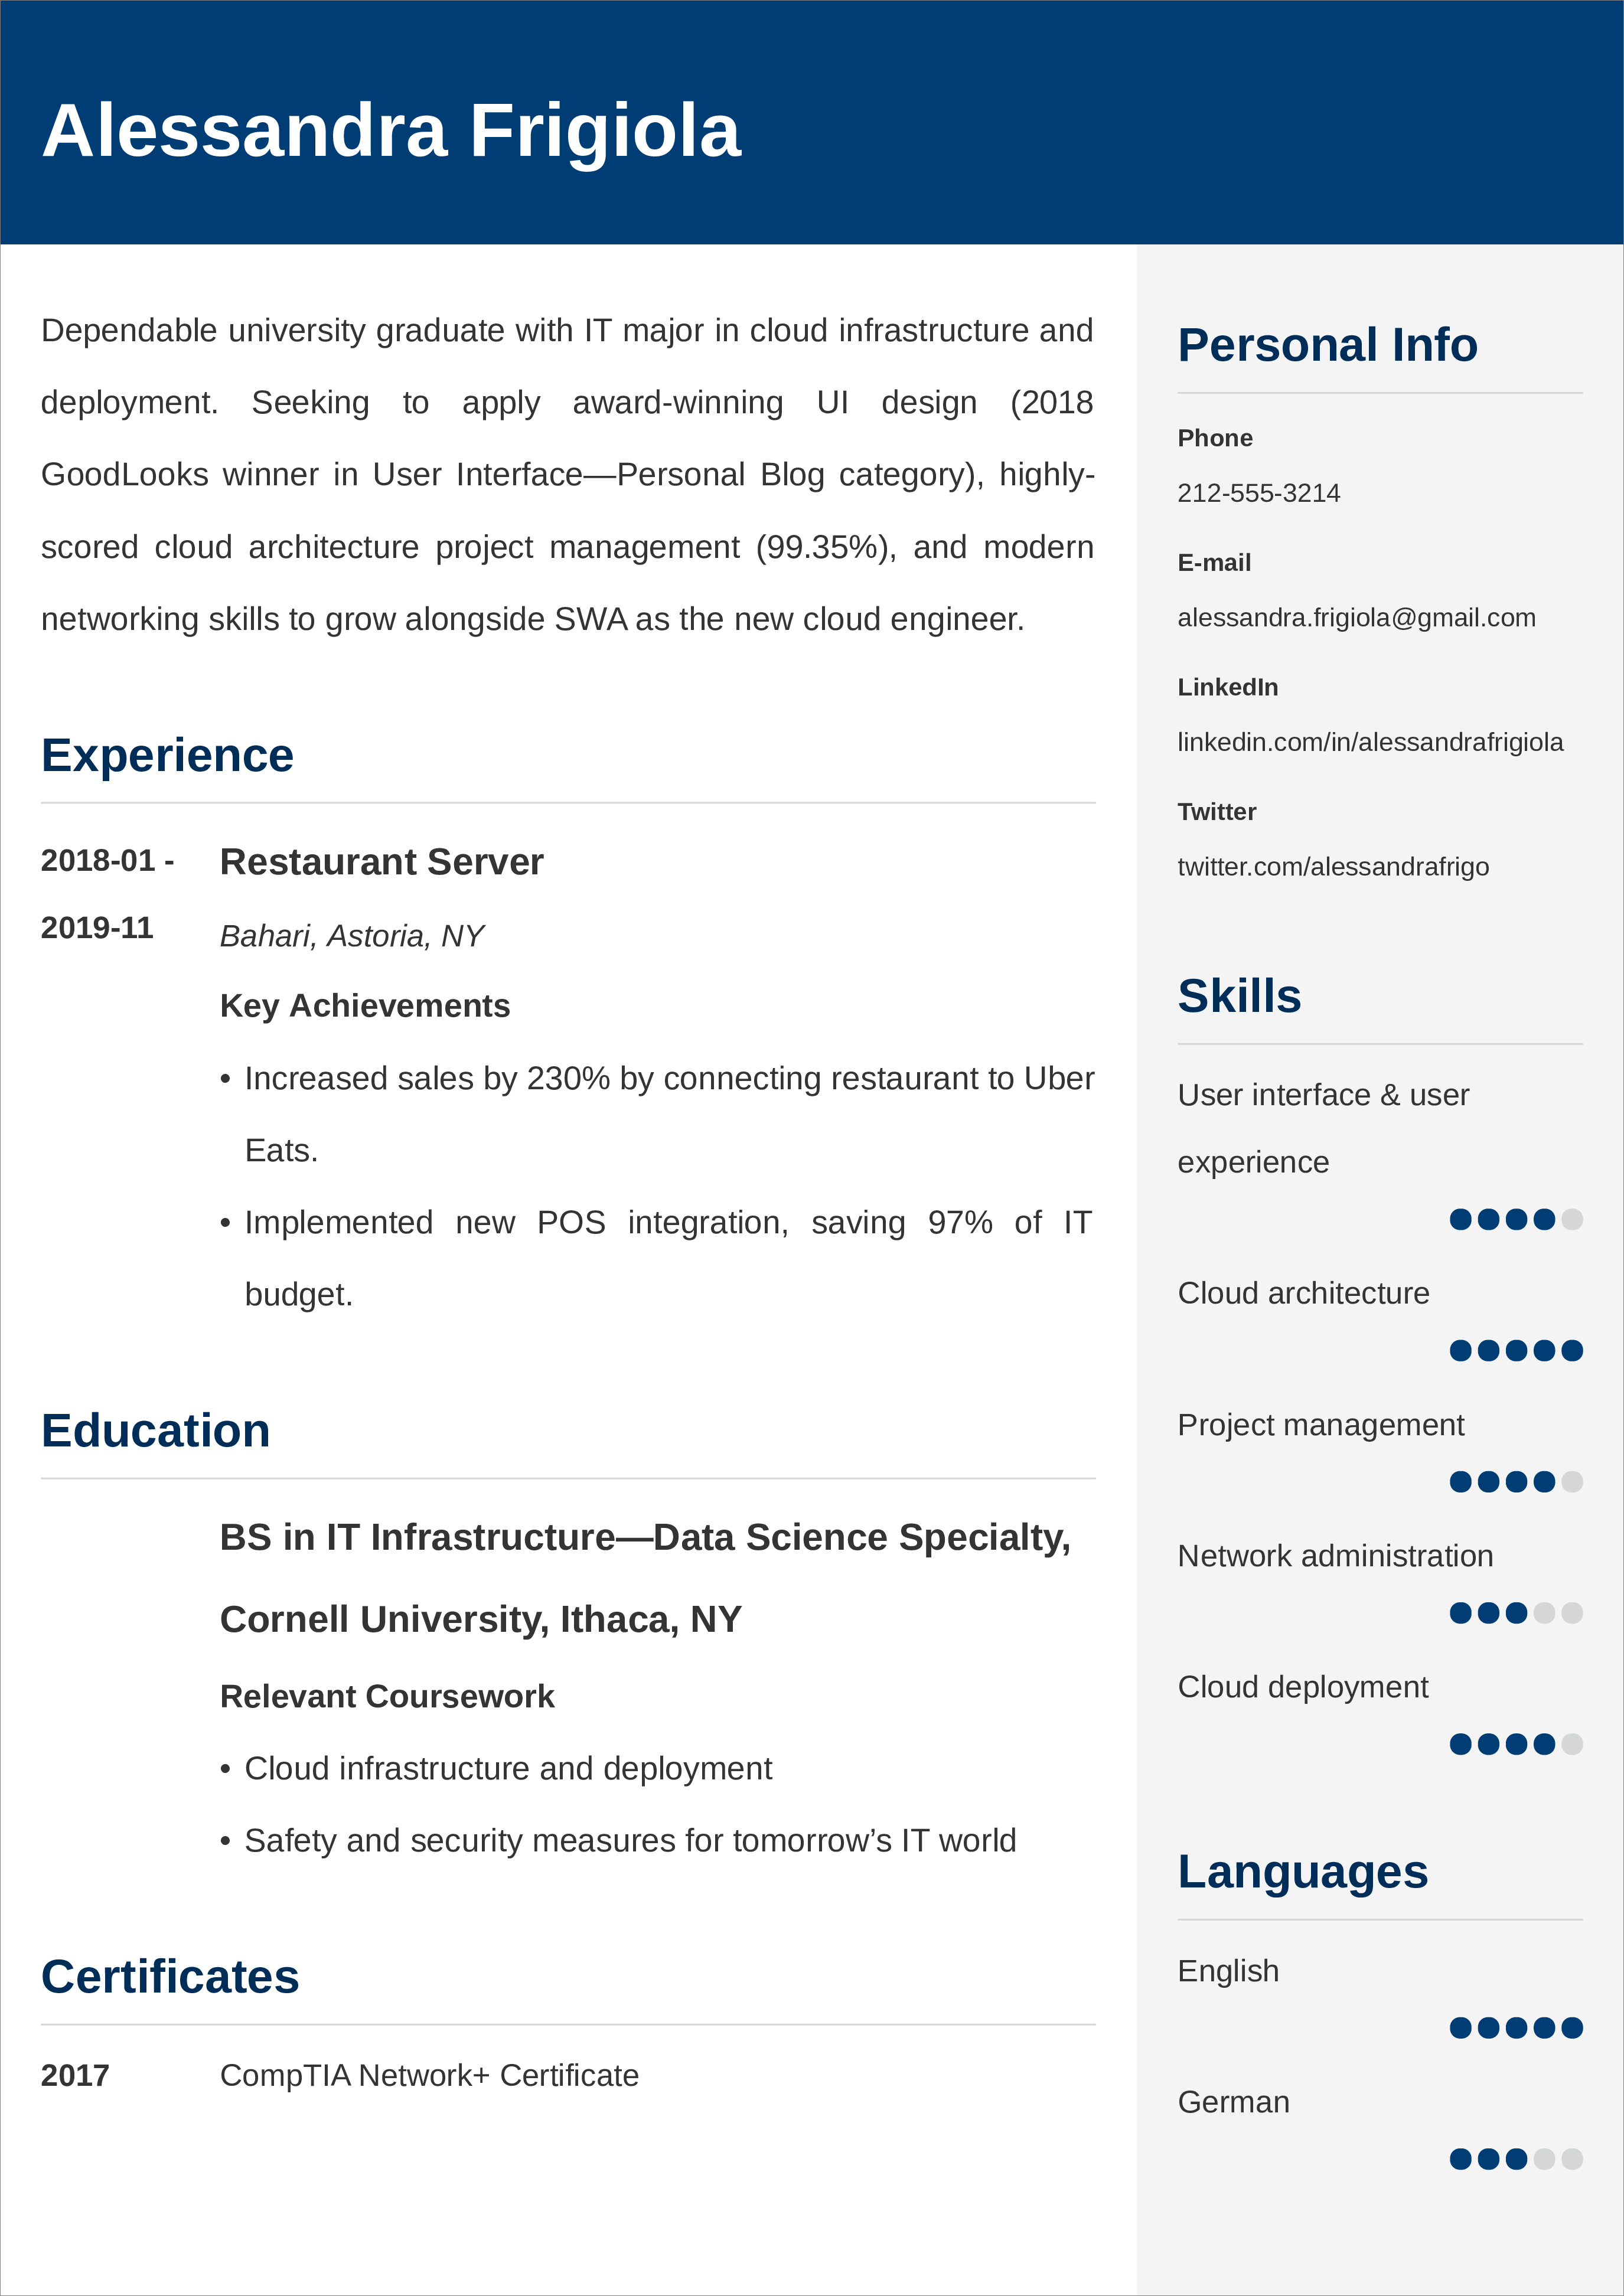 resume objective example